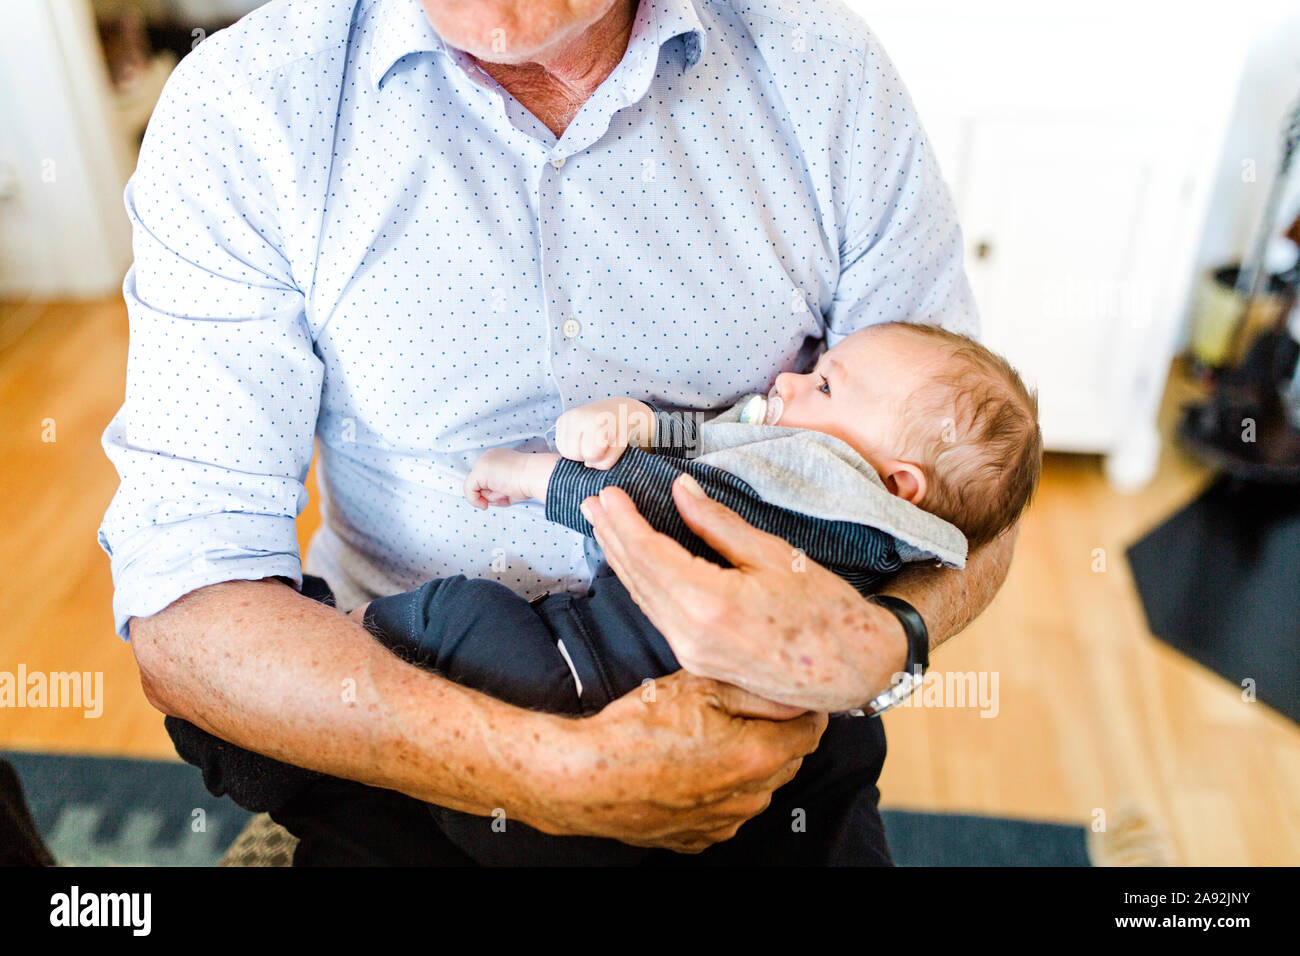 Grandfather with baby Stock Photo